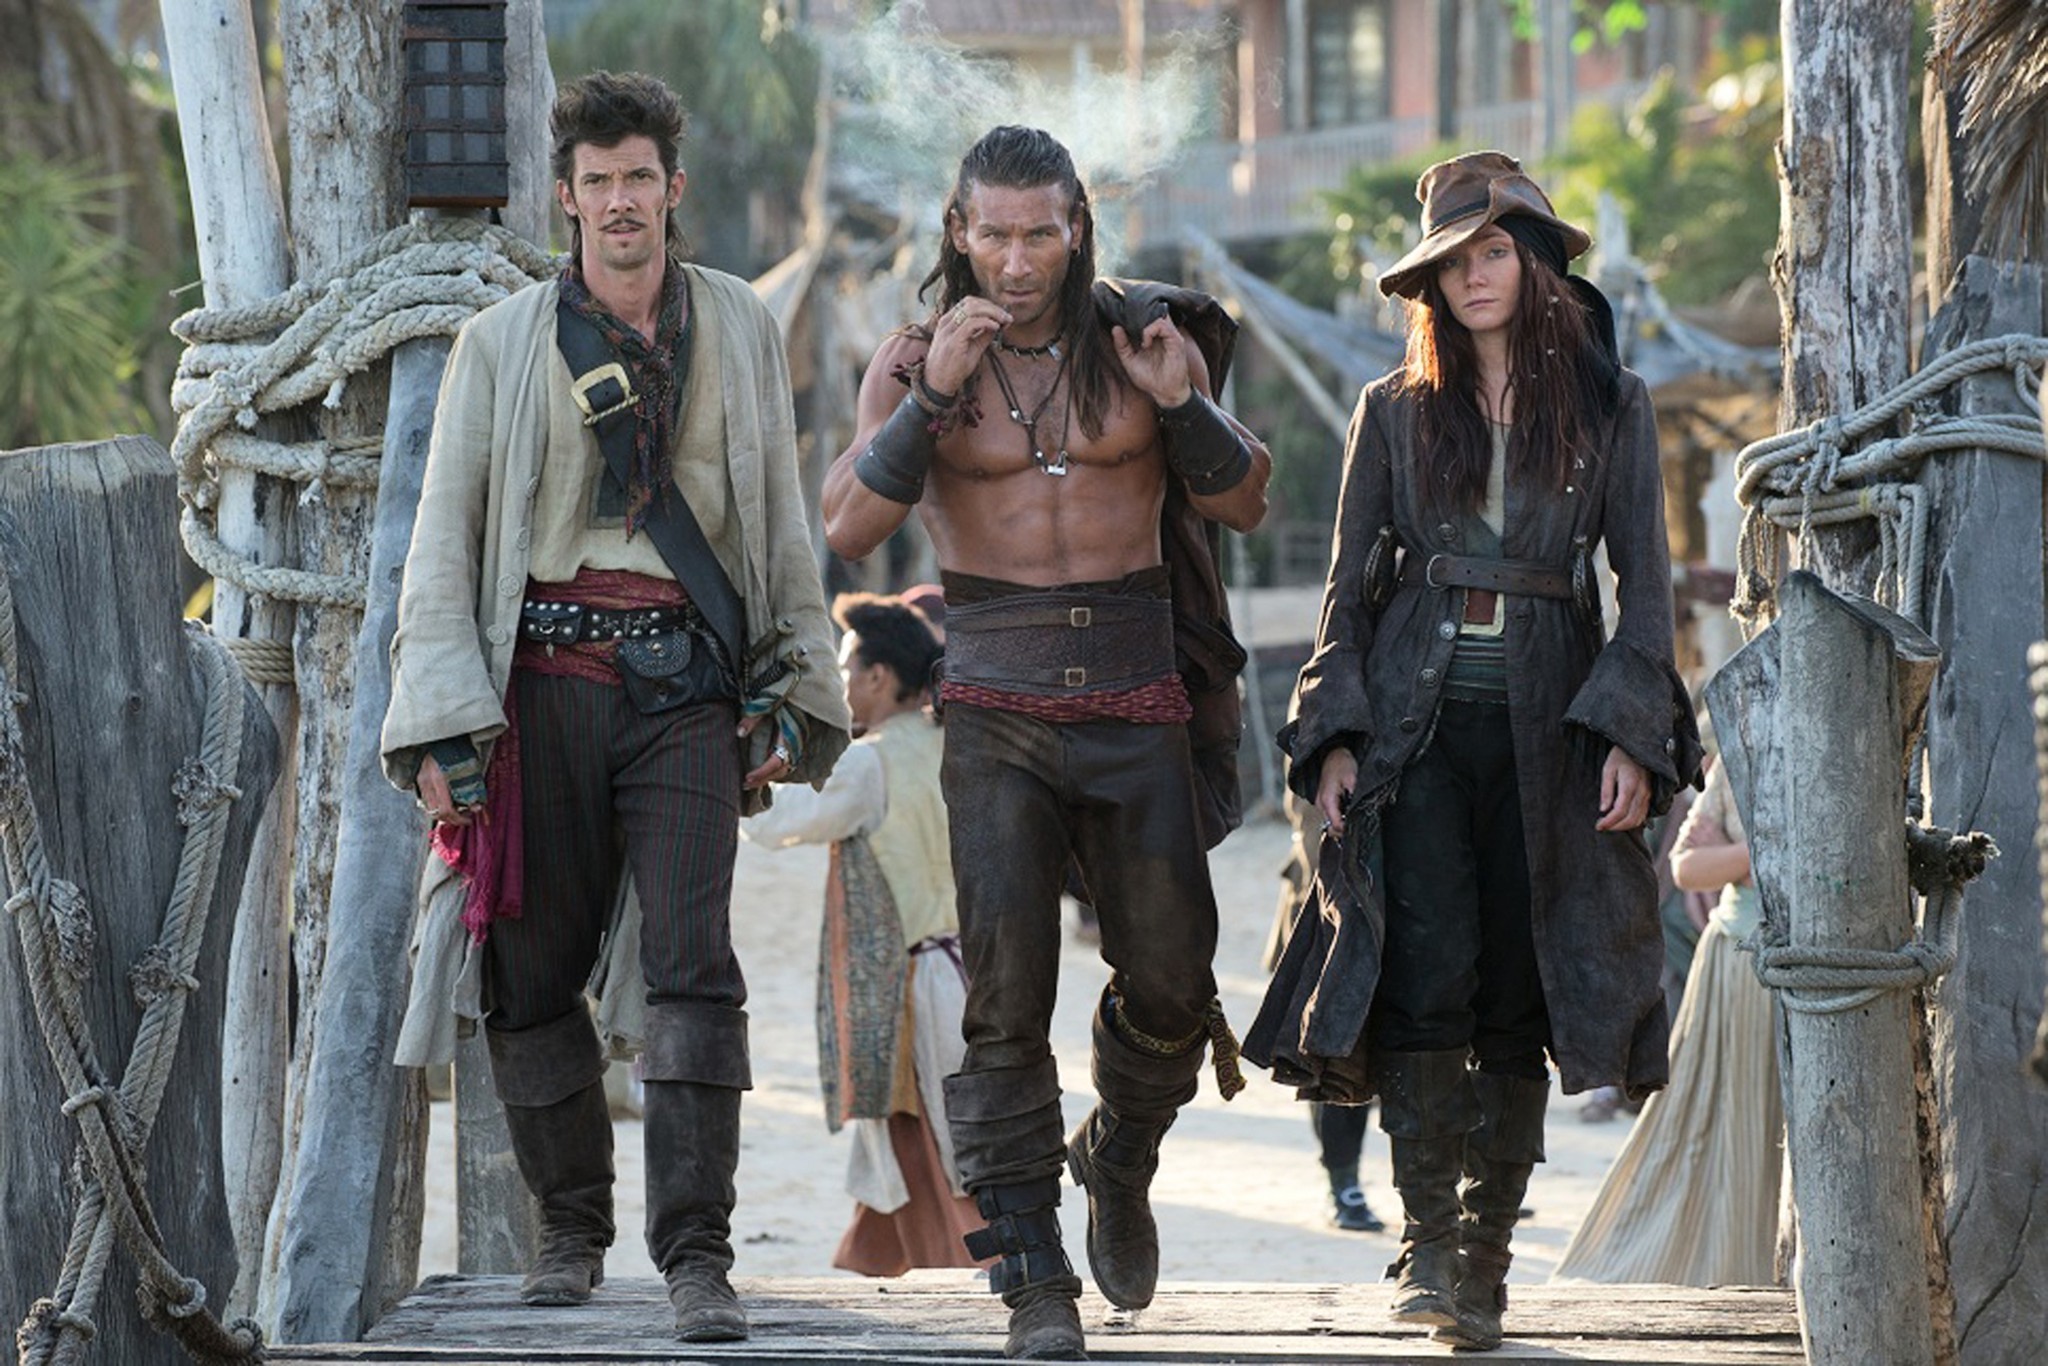 *************** TV PREVIEW FOR JANUARY 5, 2014. DO NOT USE PRIOR TO PUBLICATION.**************From left, Toby Schmitz (Jack Rackham) Zach McGowan (Charles Vane) Clara Paget (Anne Bonny star in Starz Entertainment's series BLACK SAILS. Photo Credit: Starz Entertainment.